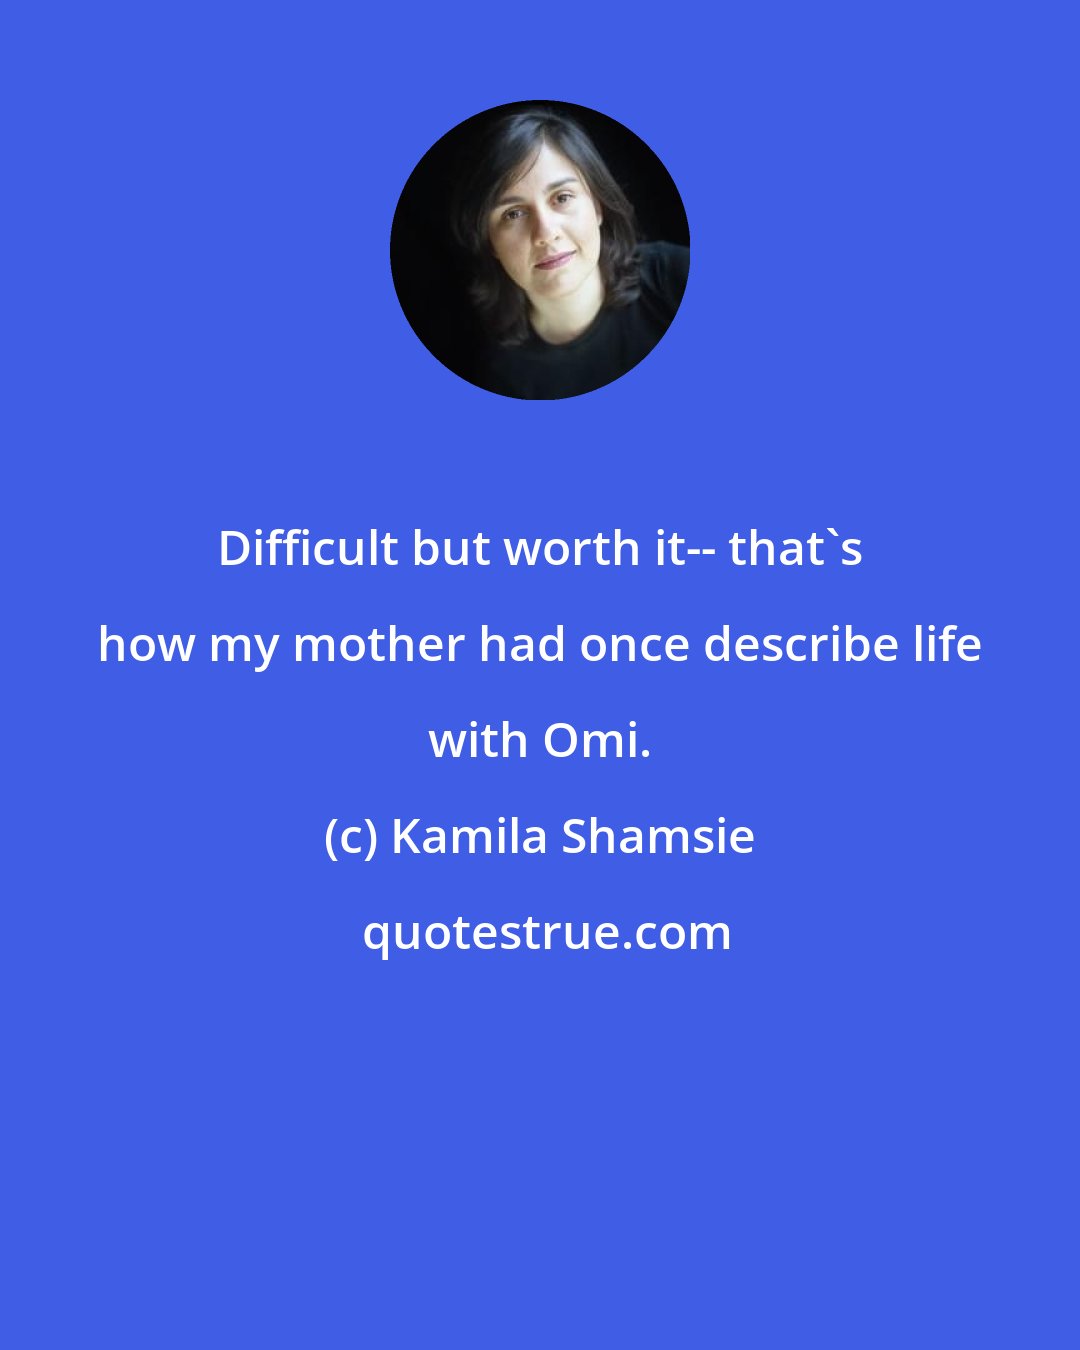 Kamila Shamsie: Difficult but worth it-- that's how my mother had once describe life with Omi.